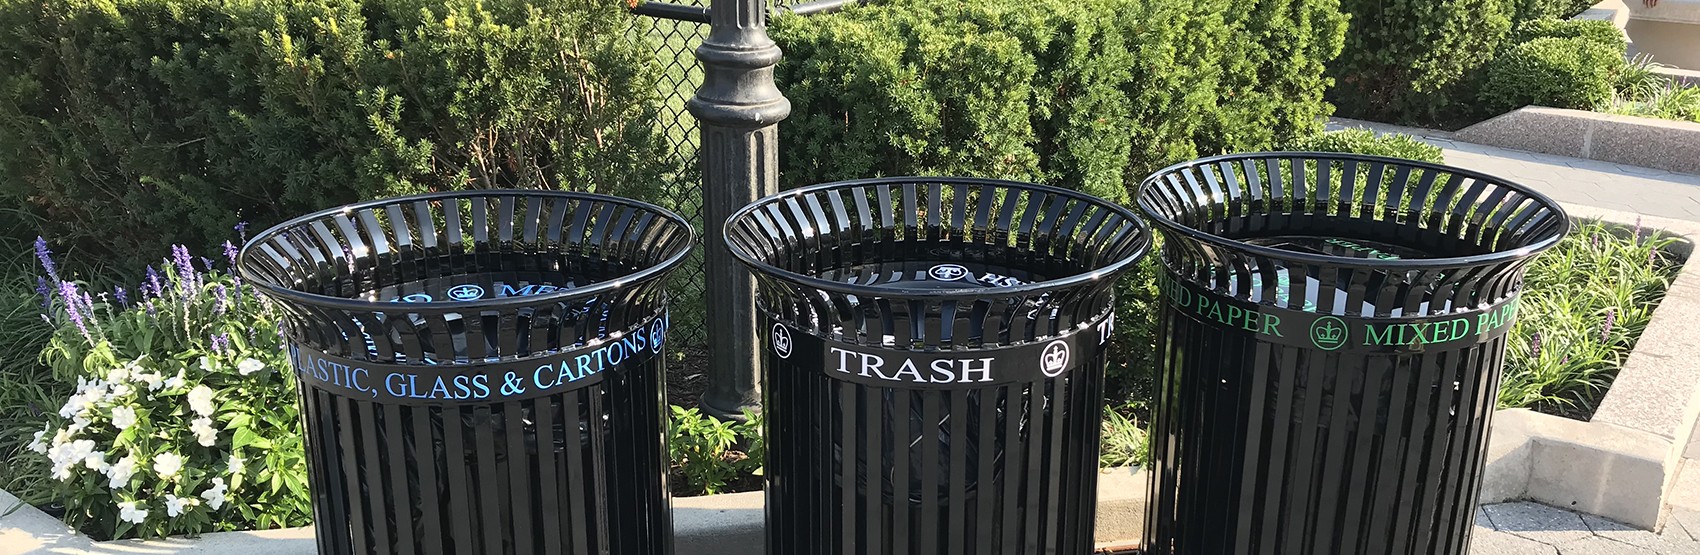 Three black bins for mixed paper, trash, and glass, metal, and plastic sit on the corner of a pathway